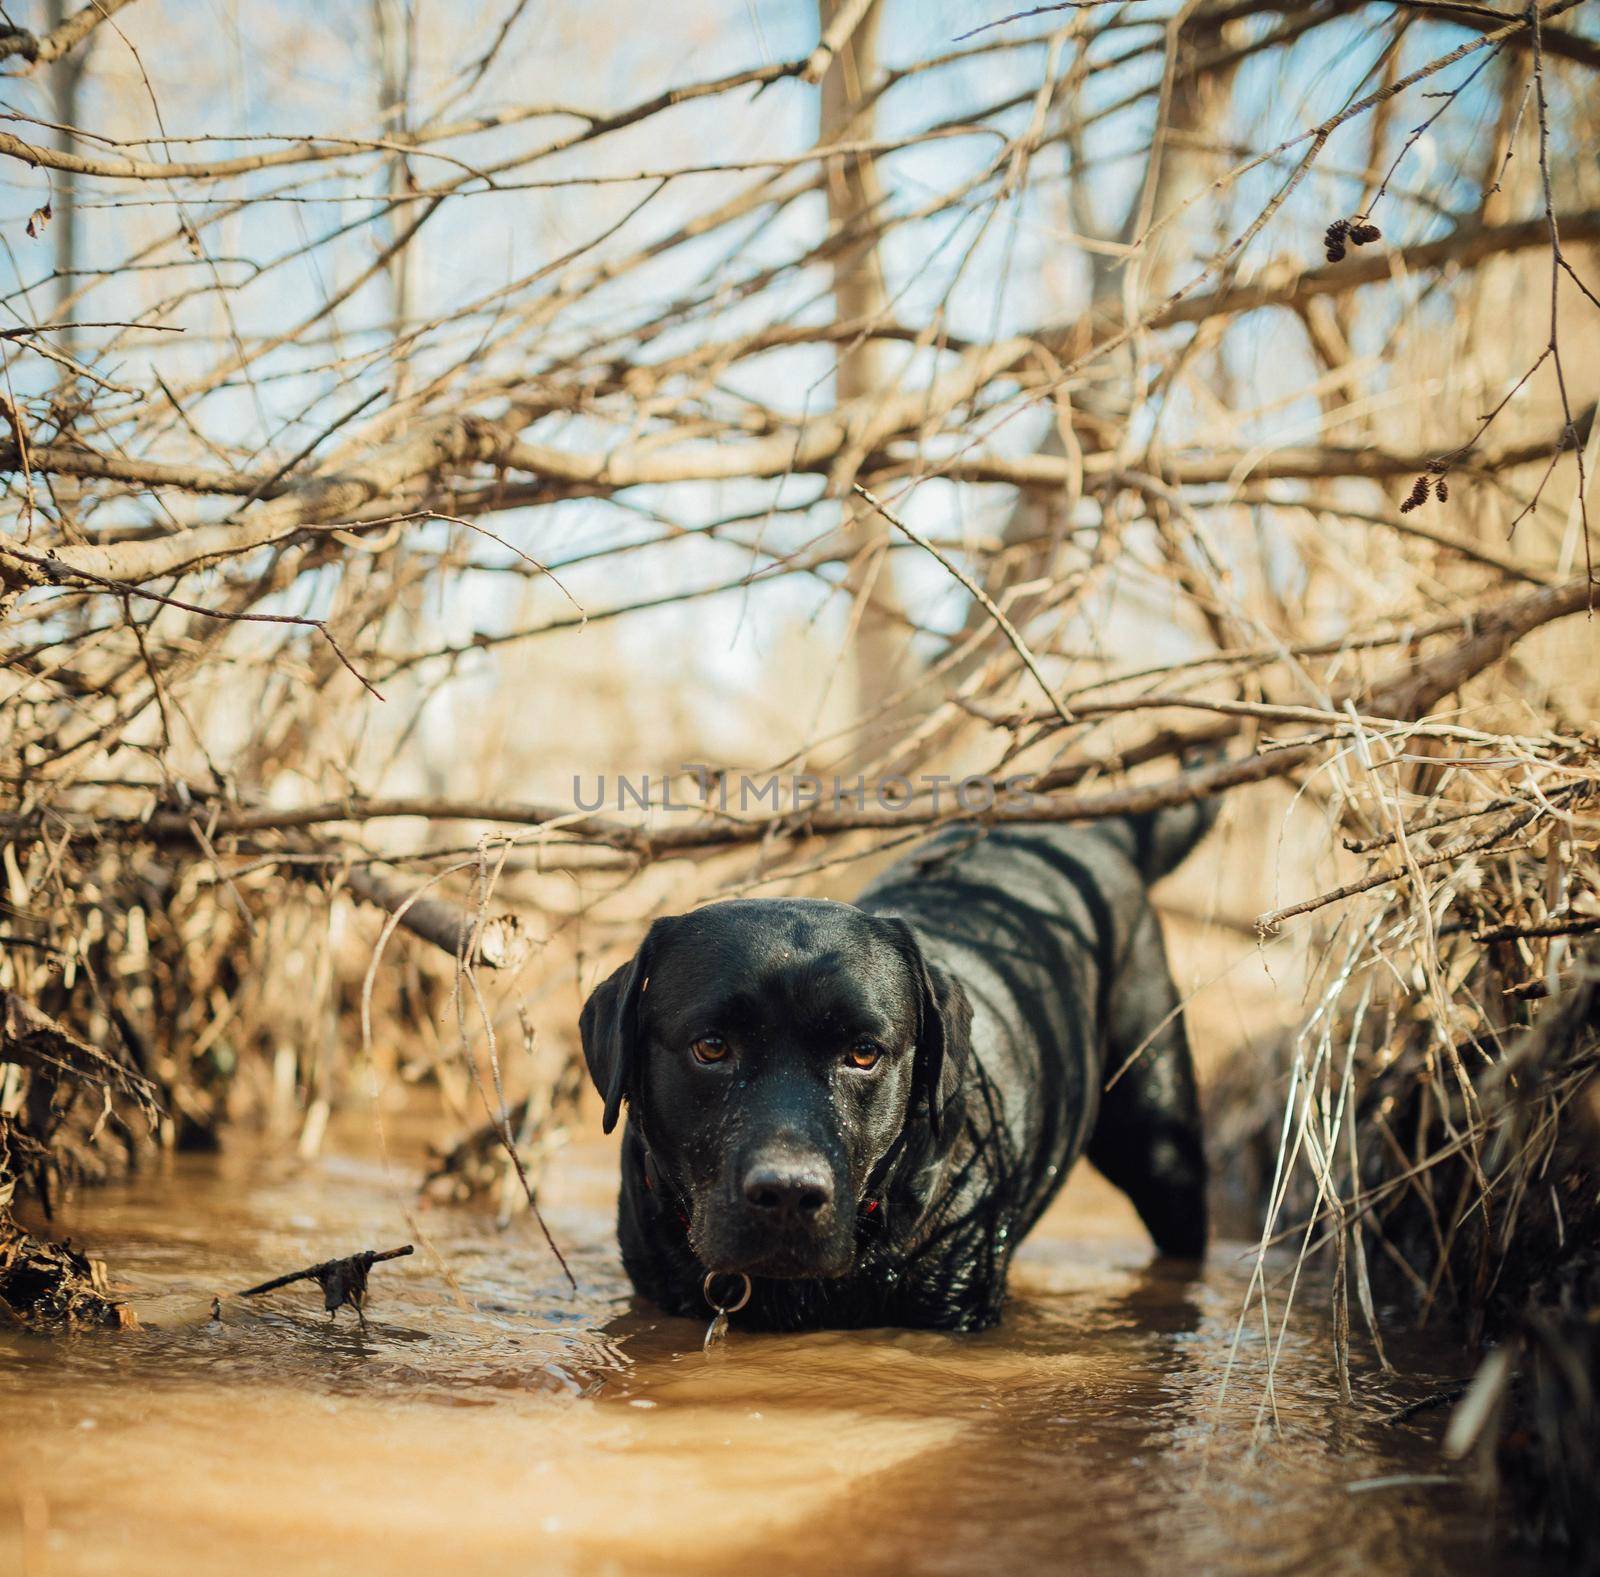 Black labrador retriever playing in a puddle of water, wet and muddy by Hitachin